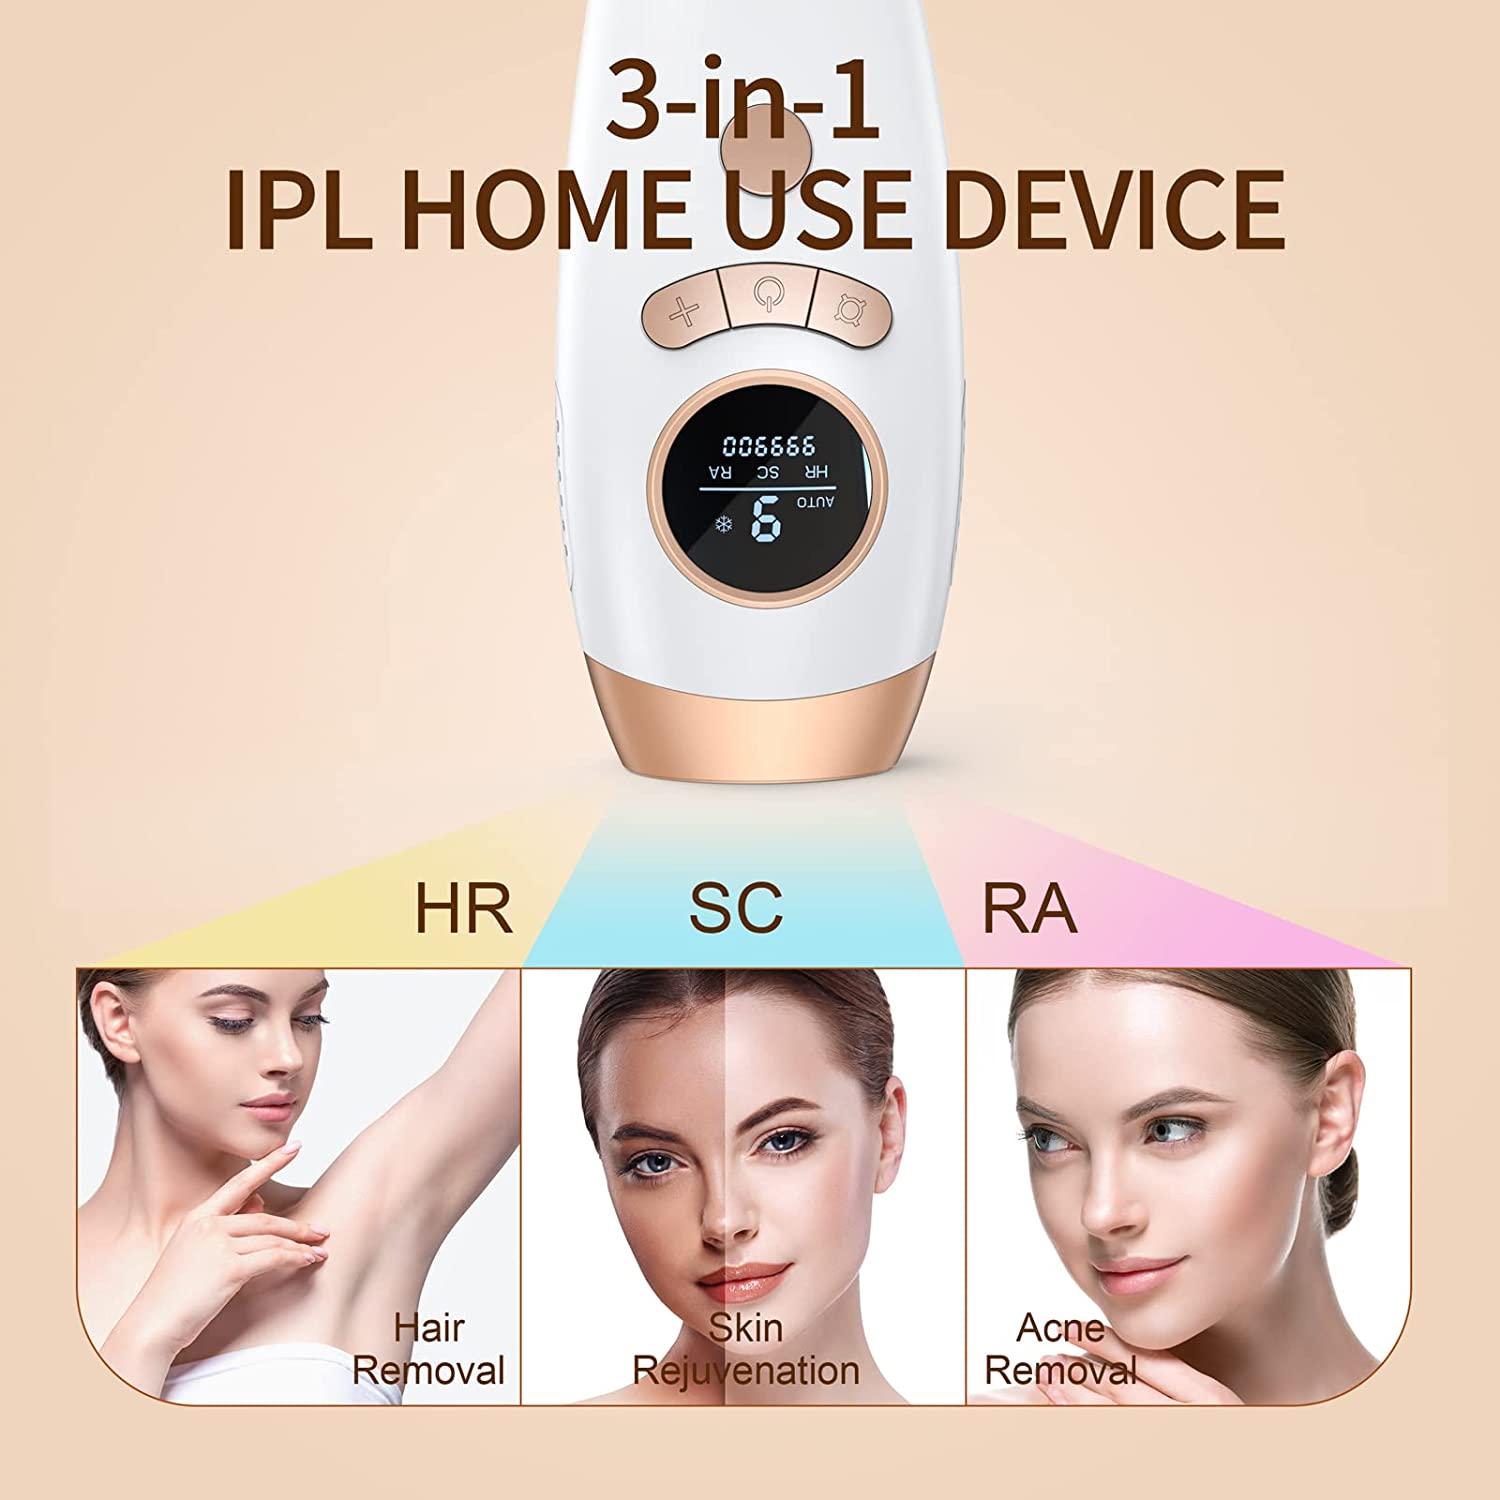 IPL Hair Removal for Women and Men, Laser Permanent 3-in-1 Face Leg Arm Back  Whole Body Hair Remover, 999,900 Flashes FDA Cleared Home Use Device Wky17